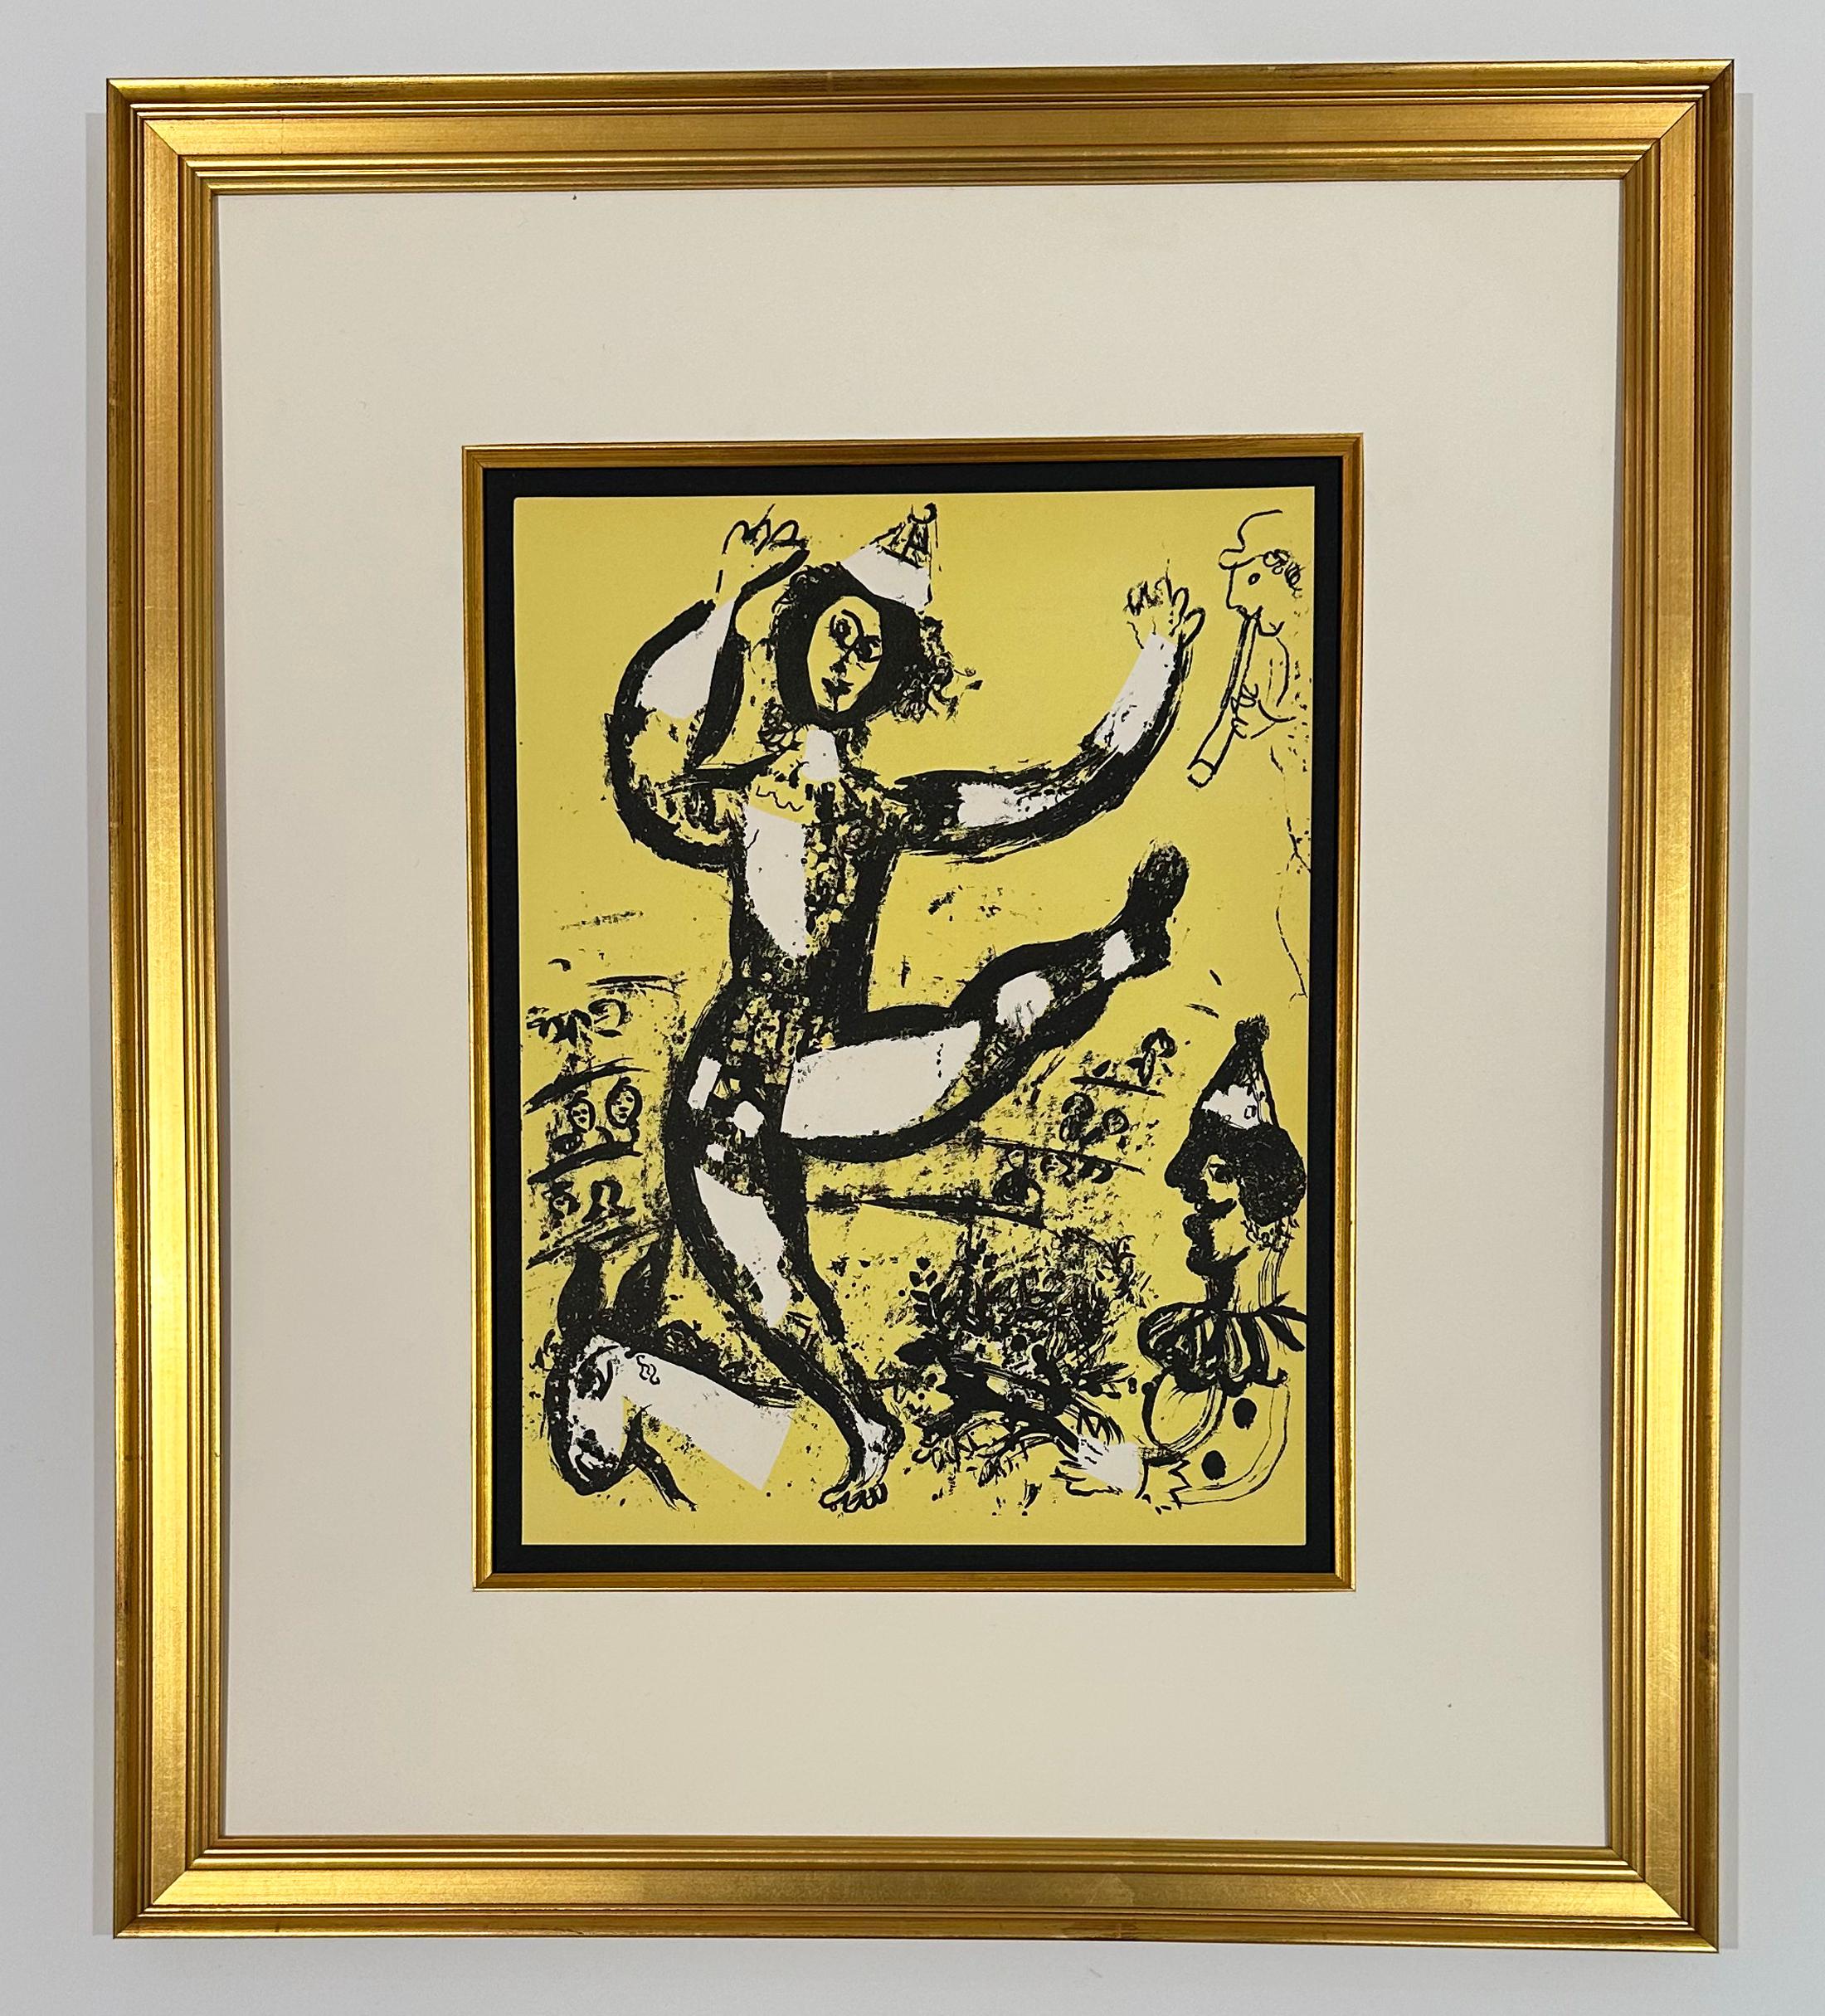 The Circus, from 1960 Mourlot Lithographe I - Print by Marc Chagall